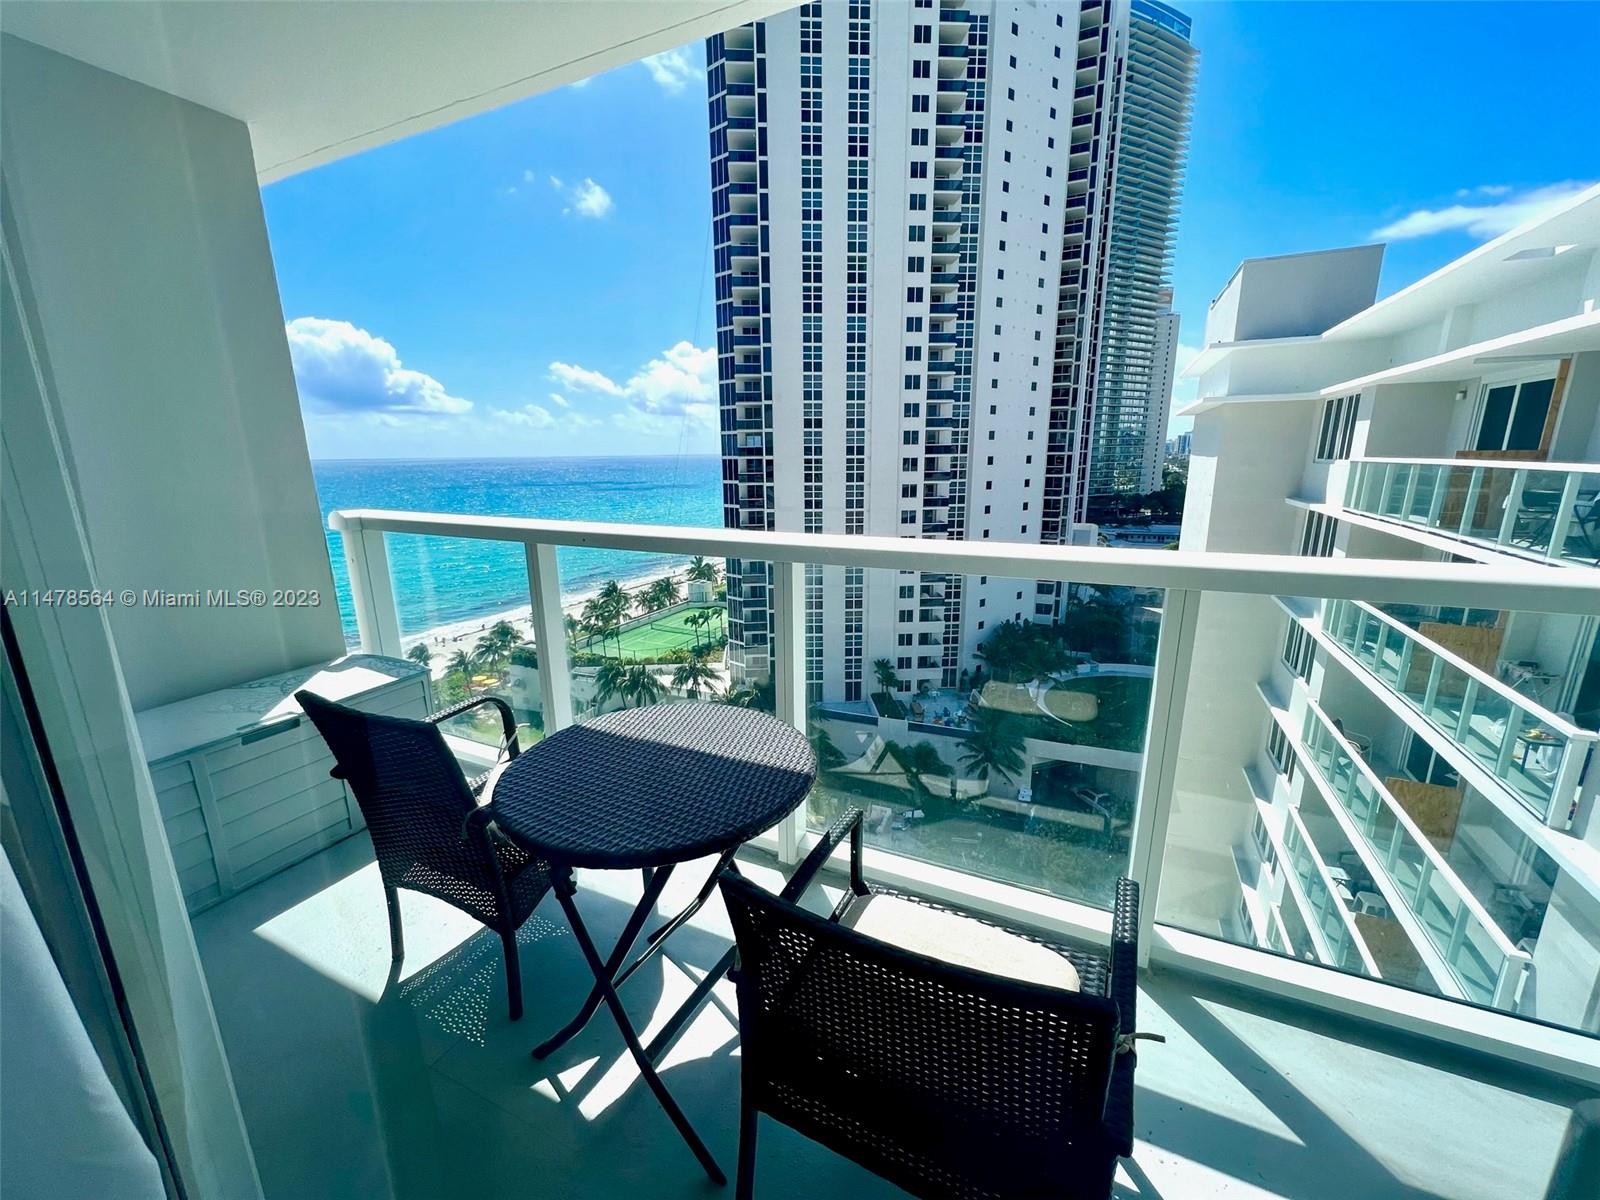 19201  Collins Ave #1102 For Sale A11478564, FL